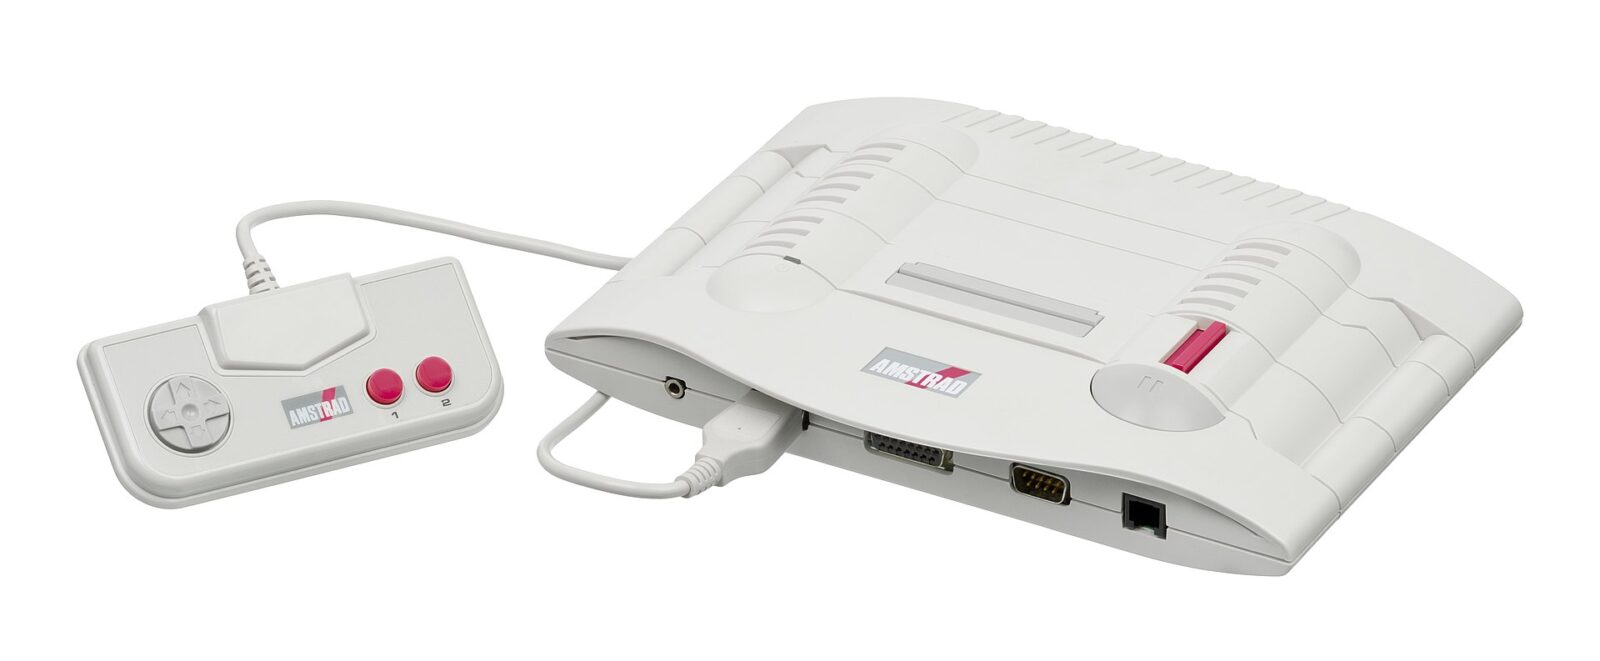 The image shows the Amstrad GX4000, a video game console released by Amstrad. It includes the console itself, which is a compact, off-white unit with a red power button, and a matching controller with a directional pad and two red action buttons. The design is characteristic of early 90s gaming hardware.